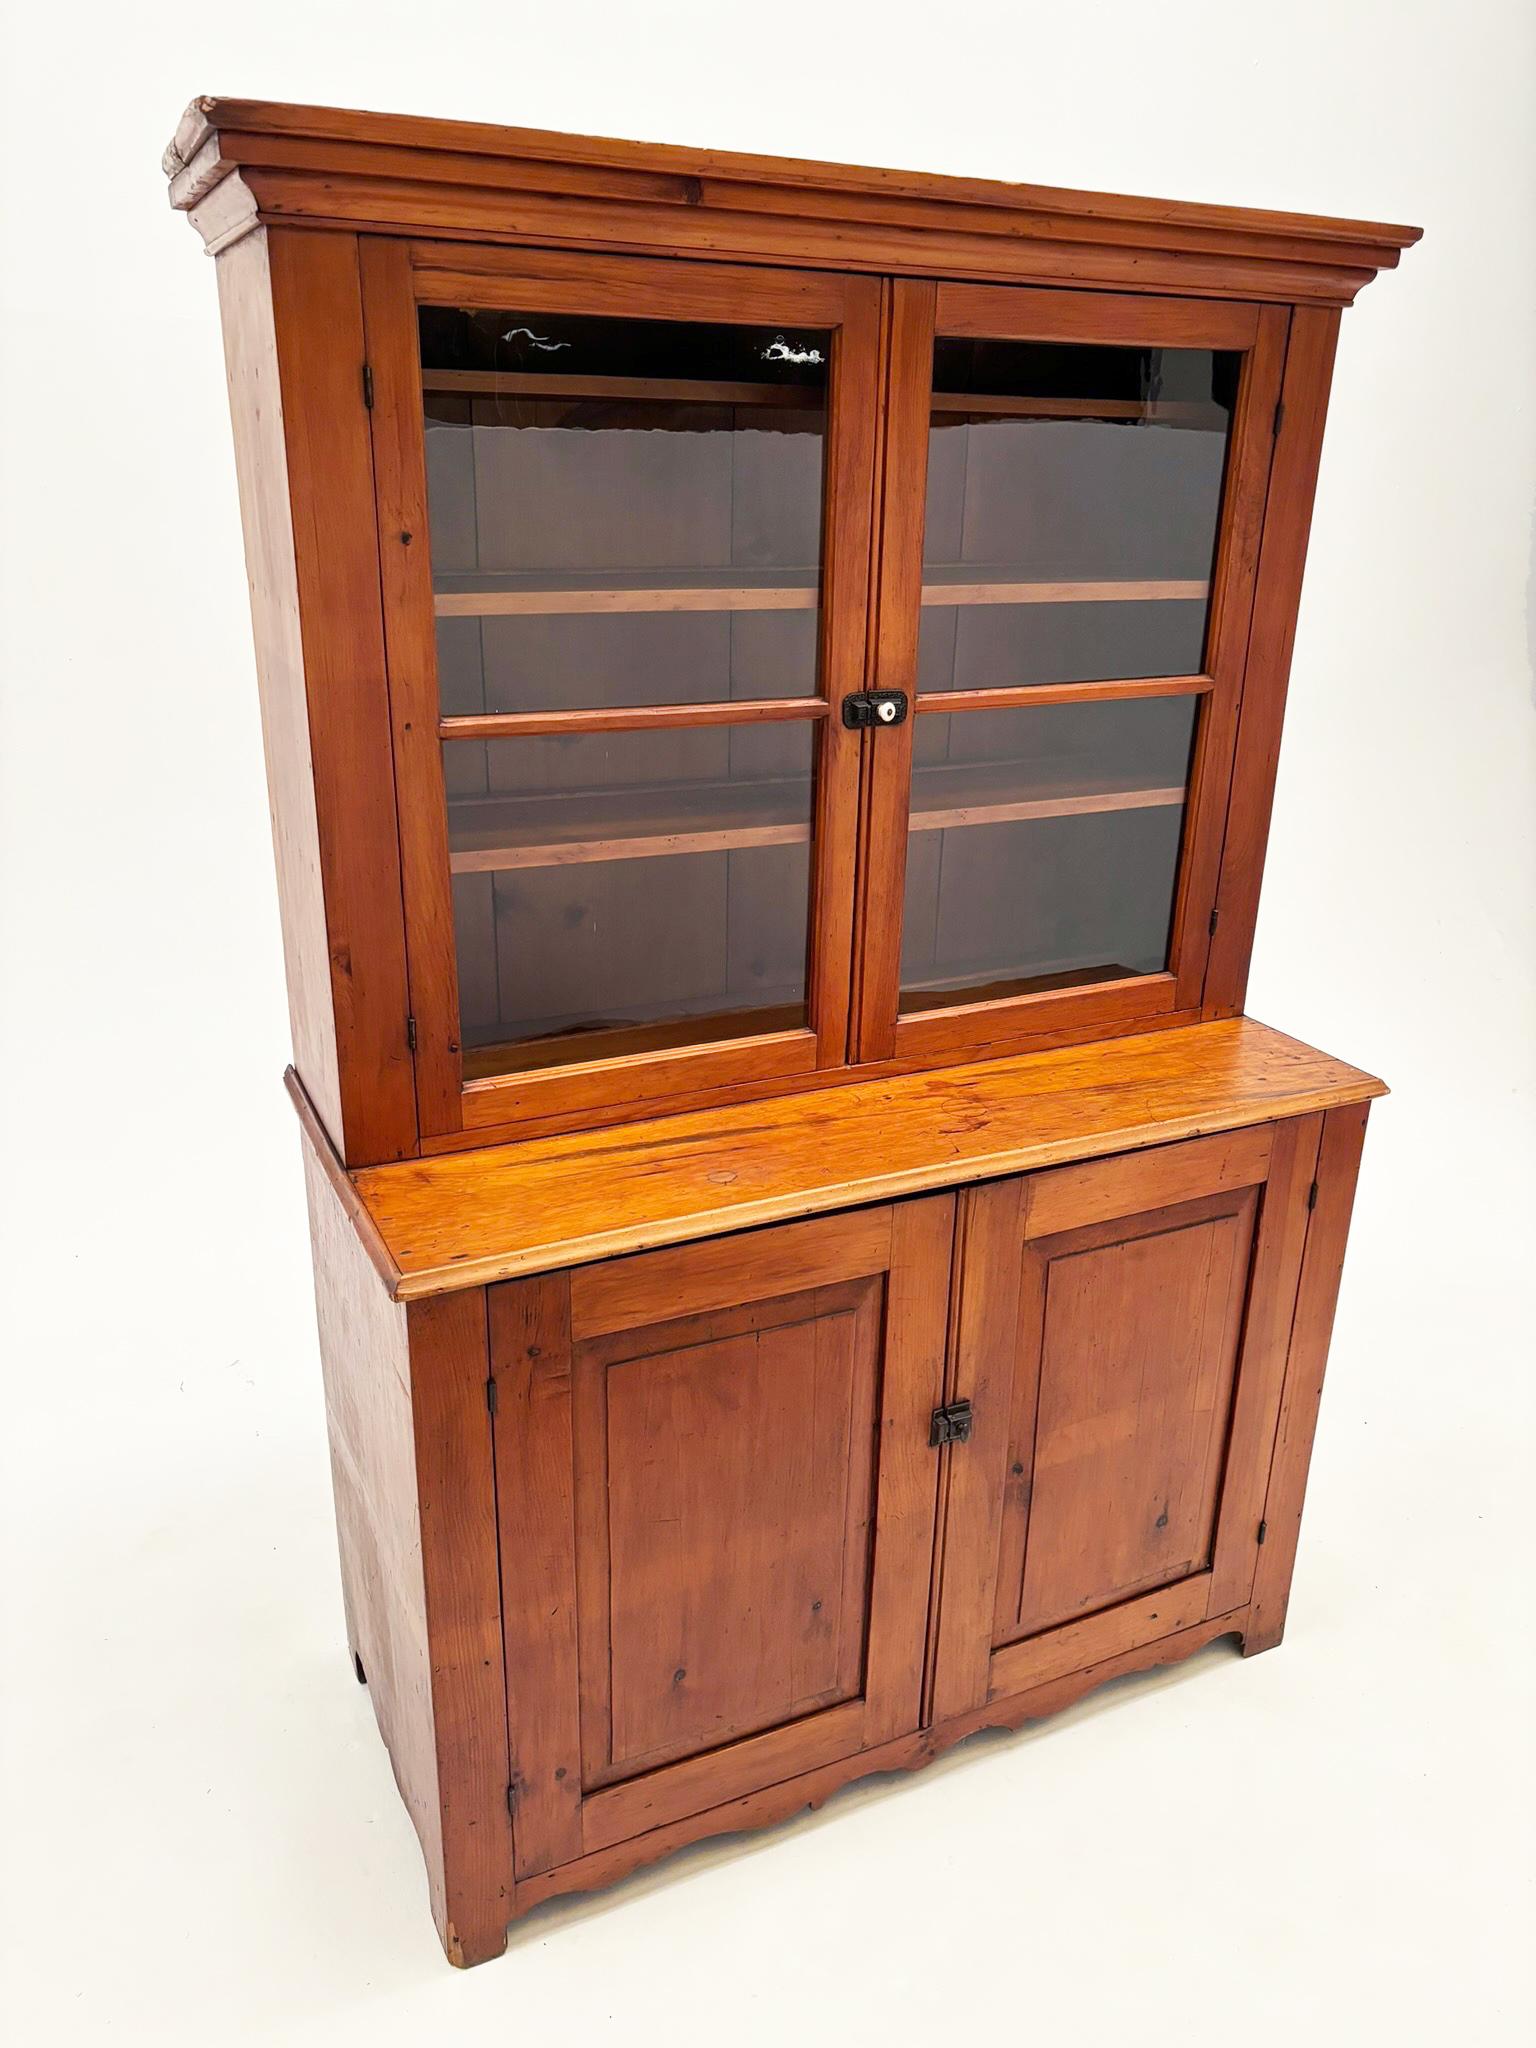 Primitive Early 1800’s Pennsylvania Dutch Pine Country Cupboard with Wavy Glass Doors For Sale